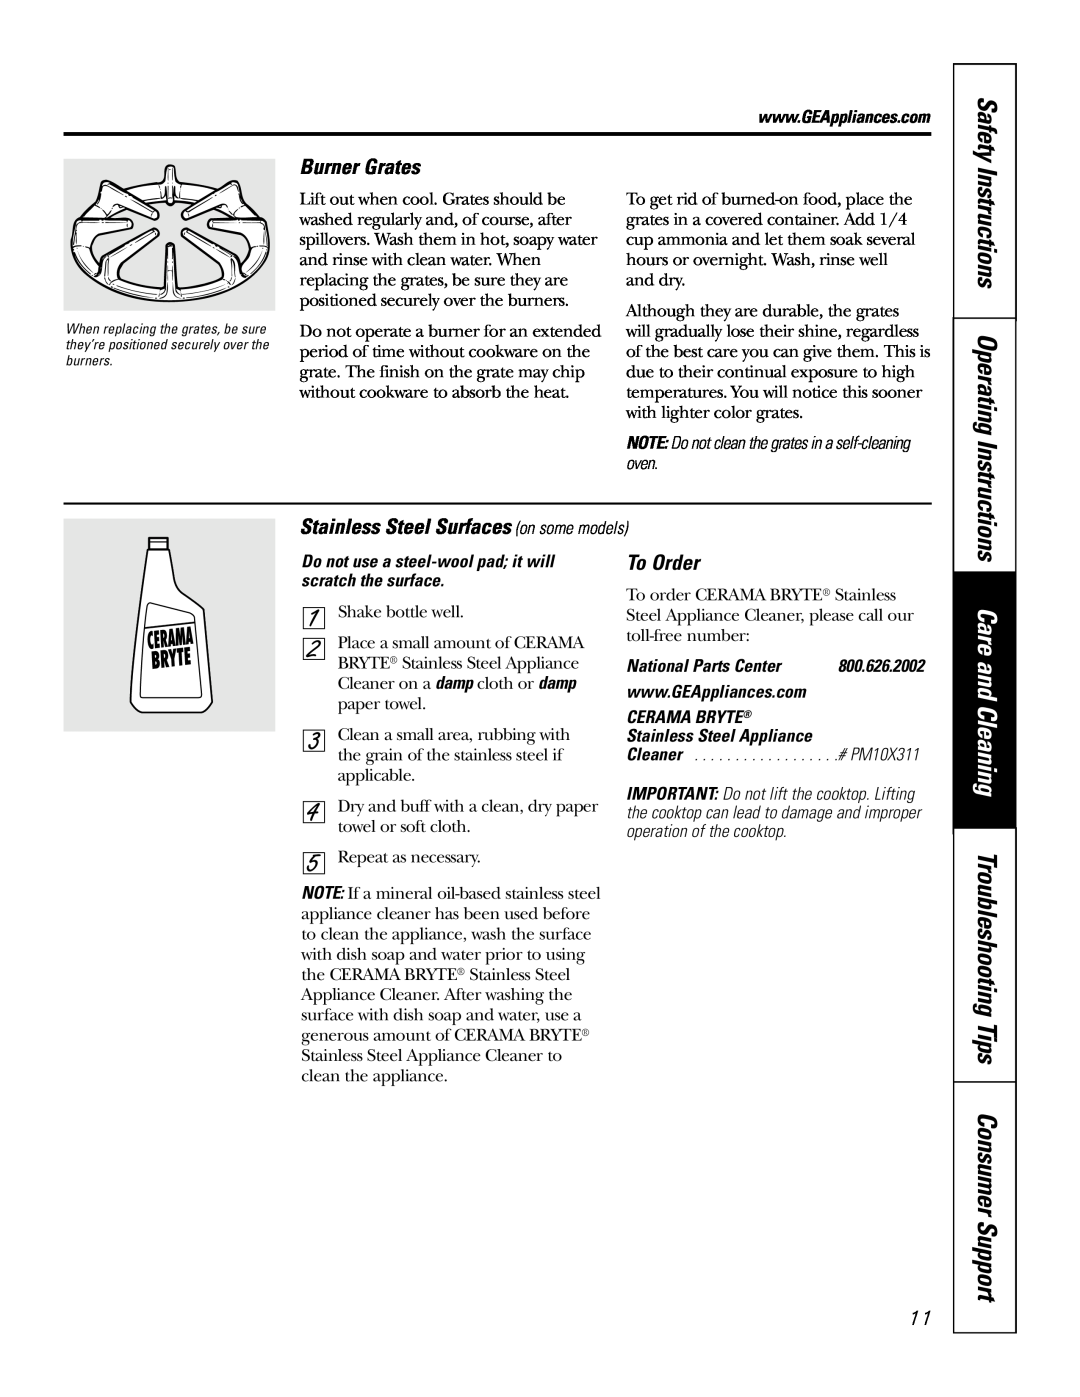 GE JGP637 Care and Cleaning Troubleshooting Tips Consumer Support, Burner Grates, Instructions Operating Instructions 